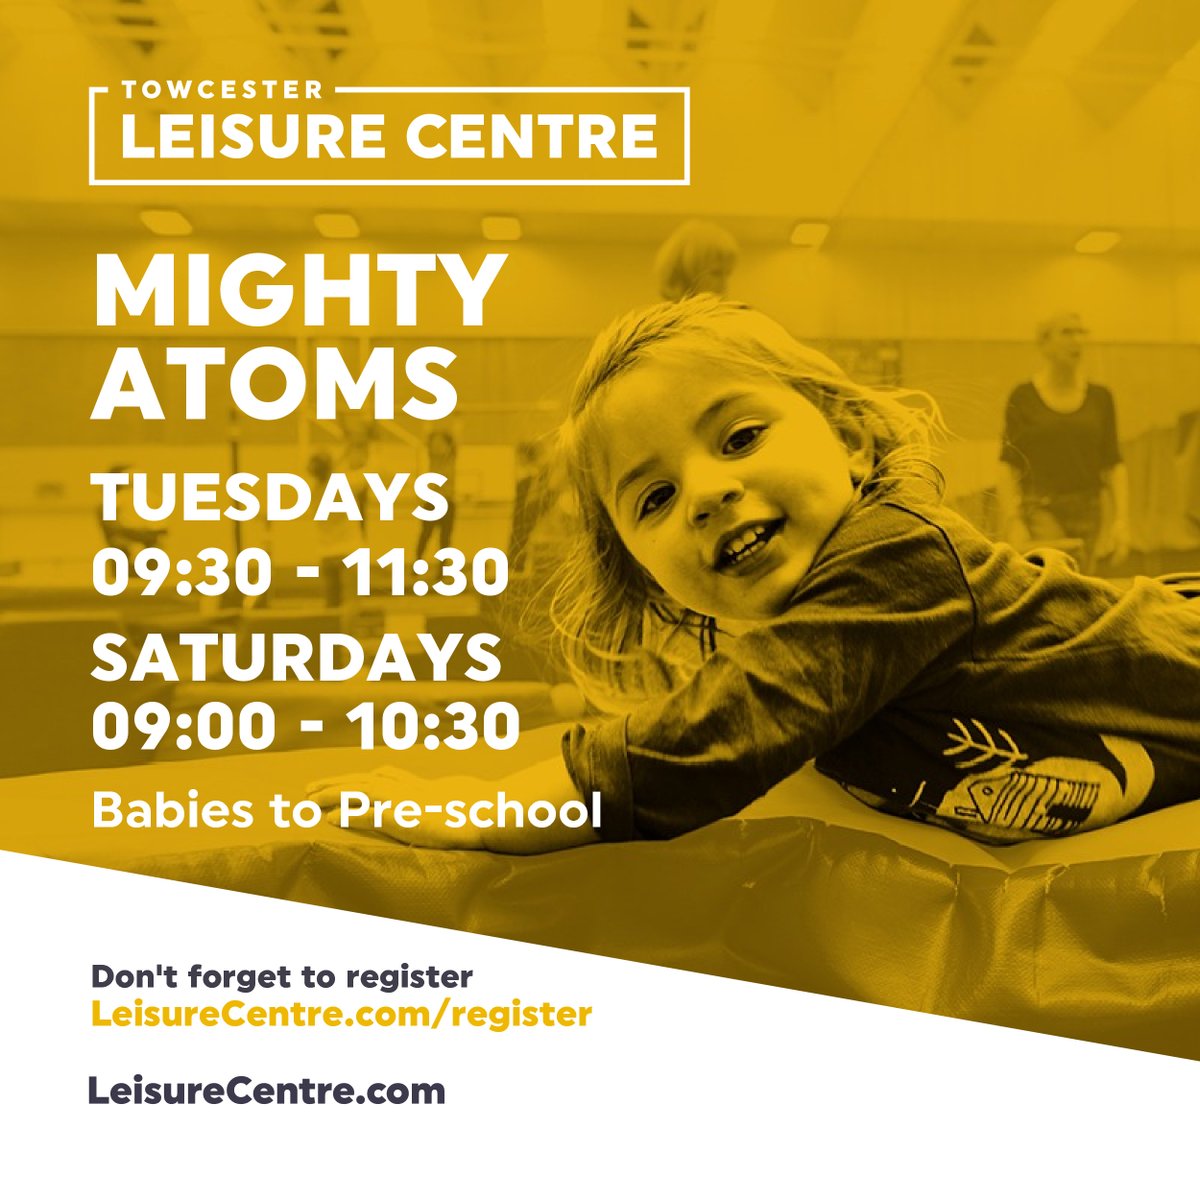 ***Mighty Atoms*** Soft play fun for babies - preschool! Bouncy castle, obstacle course, toys, games but most importantly FUN! #funandgames #childrensactivities #mylocal Please register at crowd.in/ITAyZV before your visit to save time on arrival (term time only)